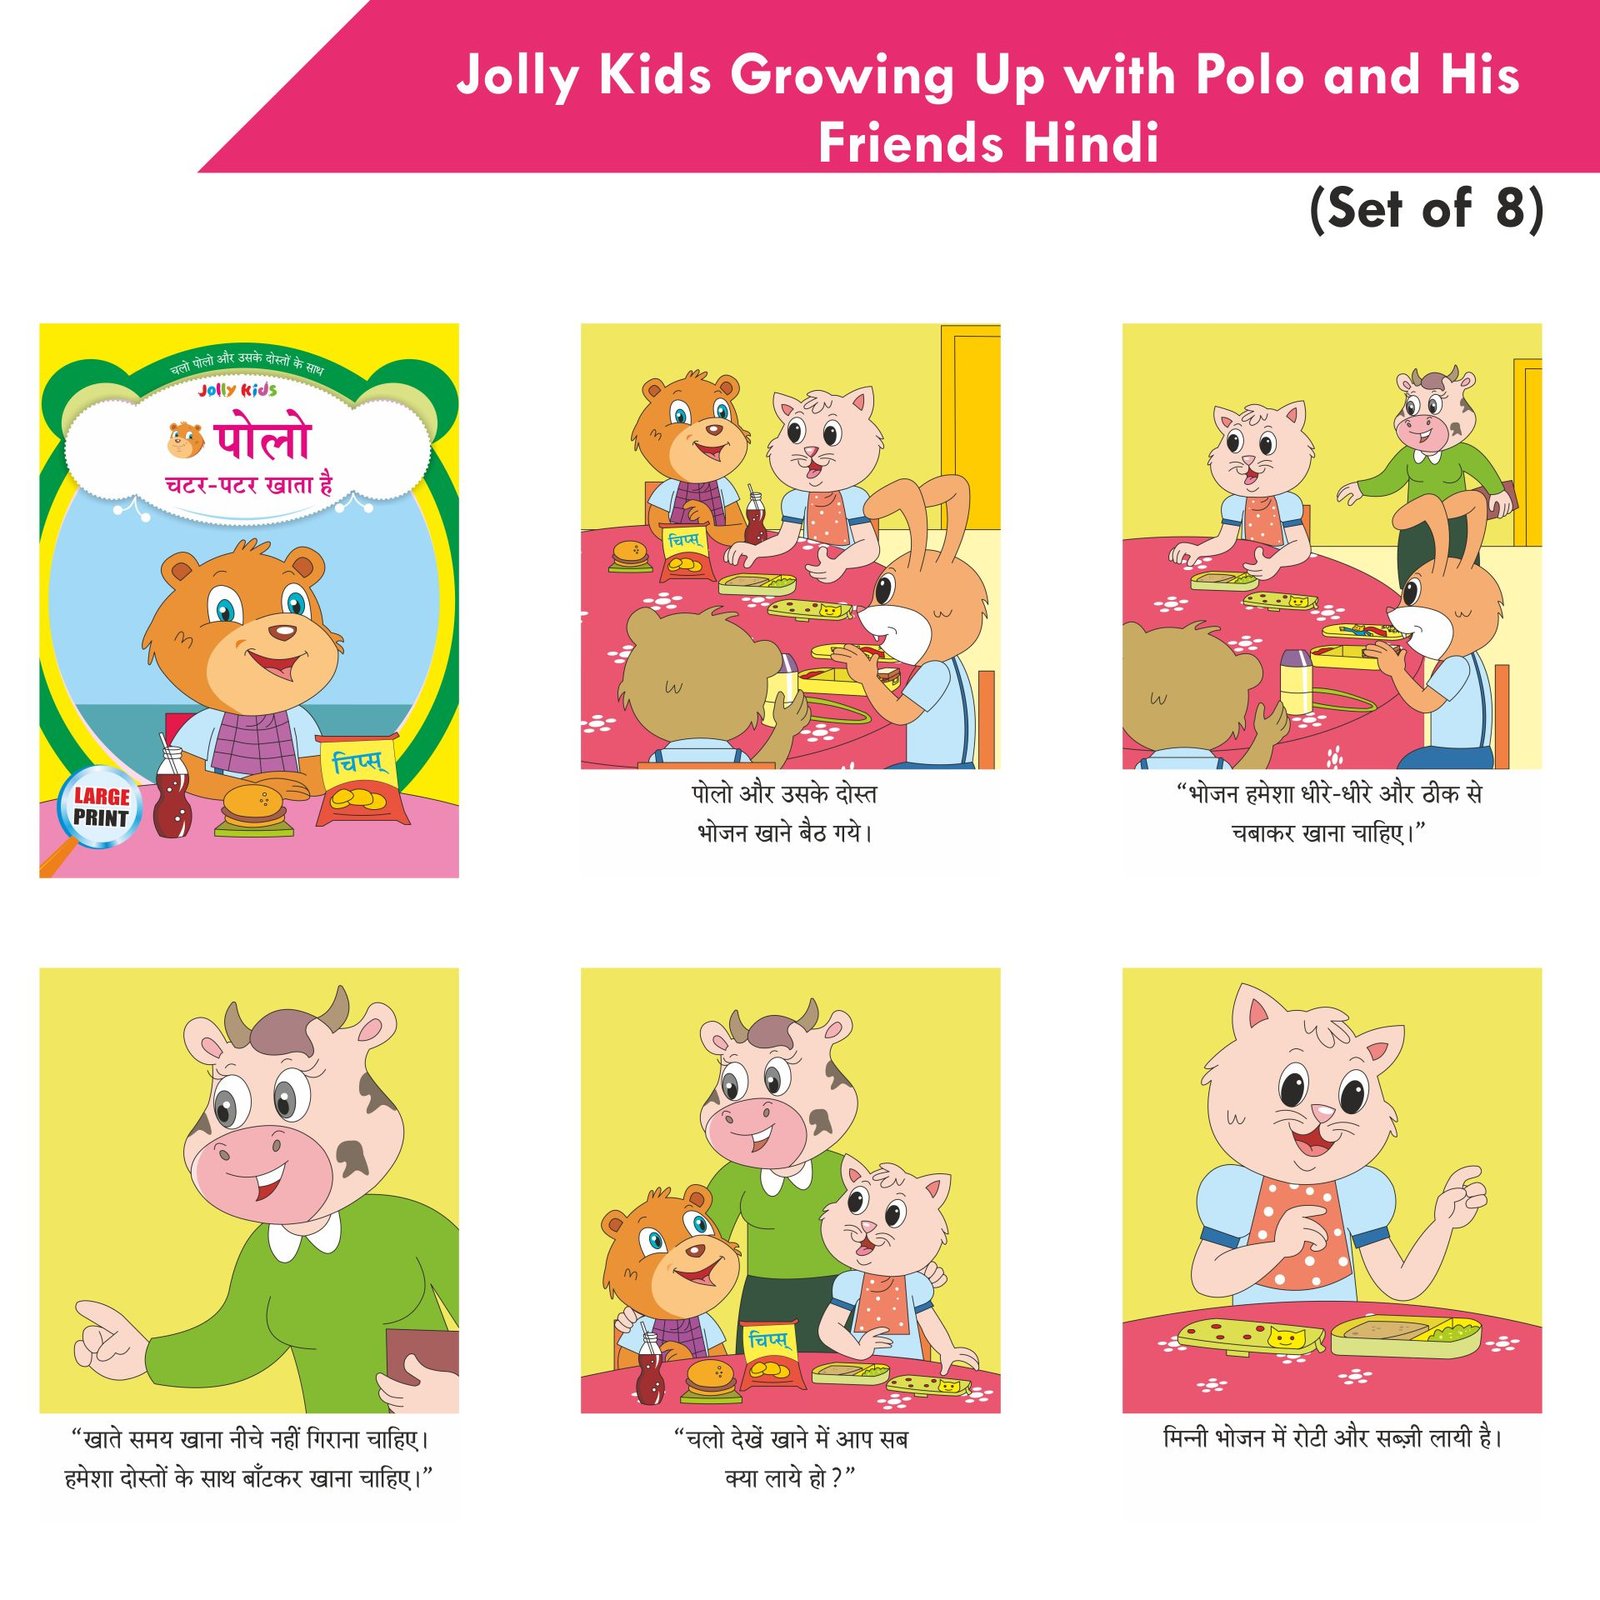 Jolly Kids Growing Up with Polo and His Friends Hindi Set of 8 4